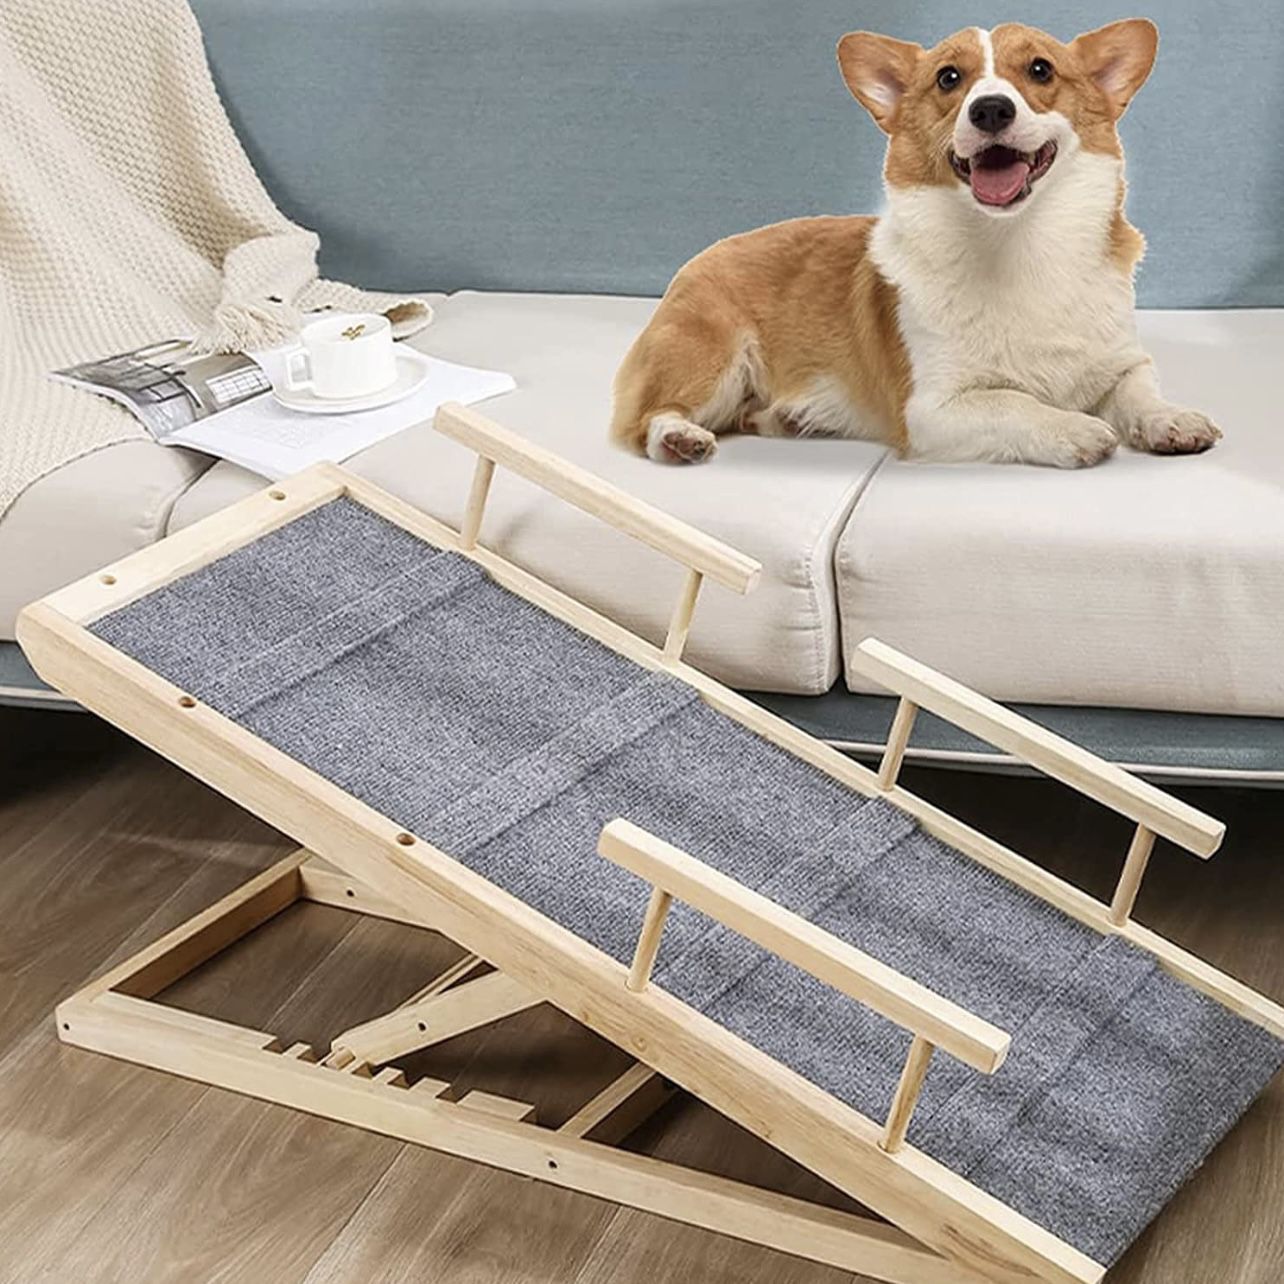 Adjustable Dog Ramp for All Dogs and Cats - Dog ramp for Couch or Bed with Paw Traction Mat - 41" Long and 6 Heights from 11" to 25" - Rated for 200LB